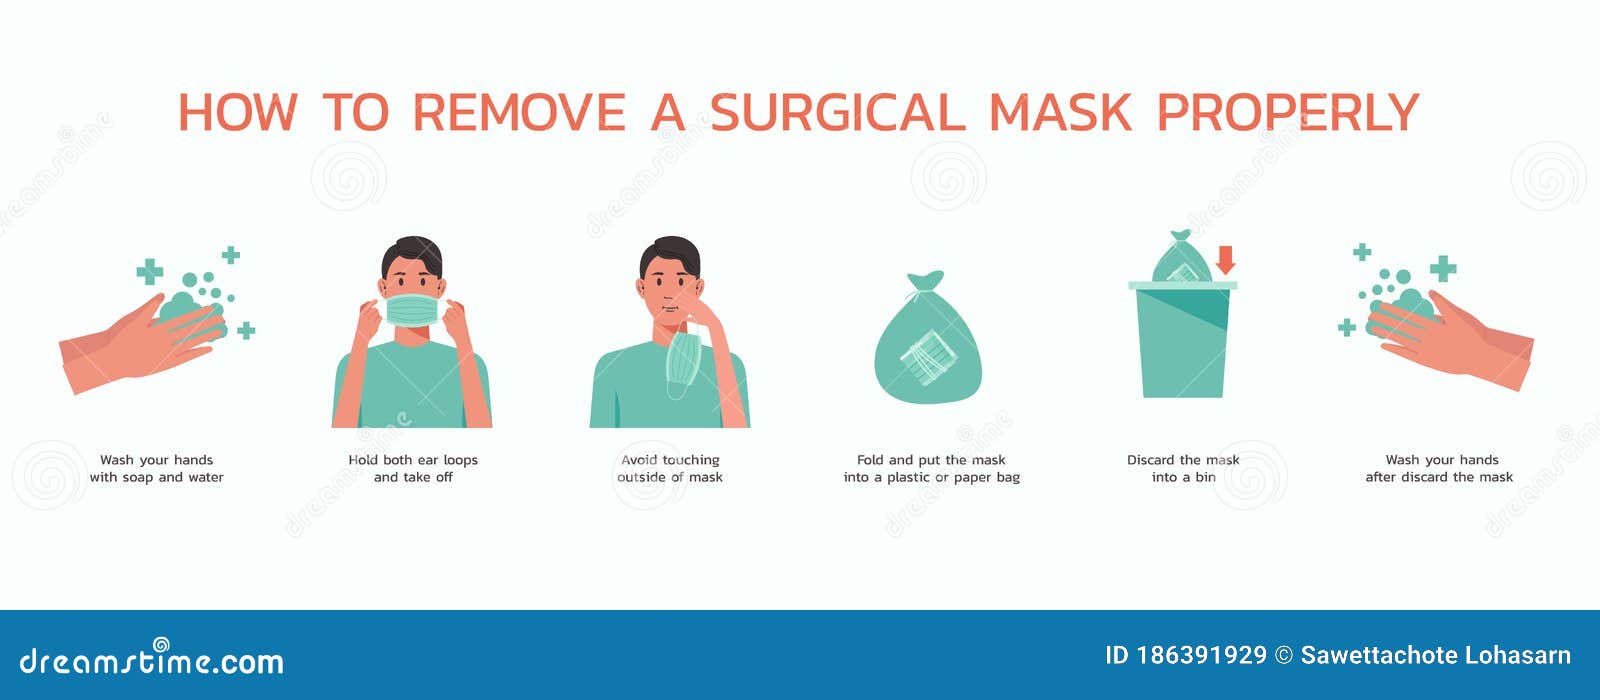 how to remove surgical mask properly infographic